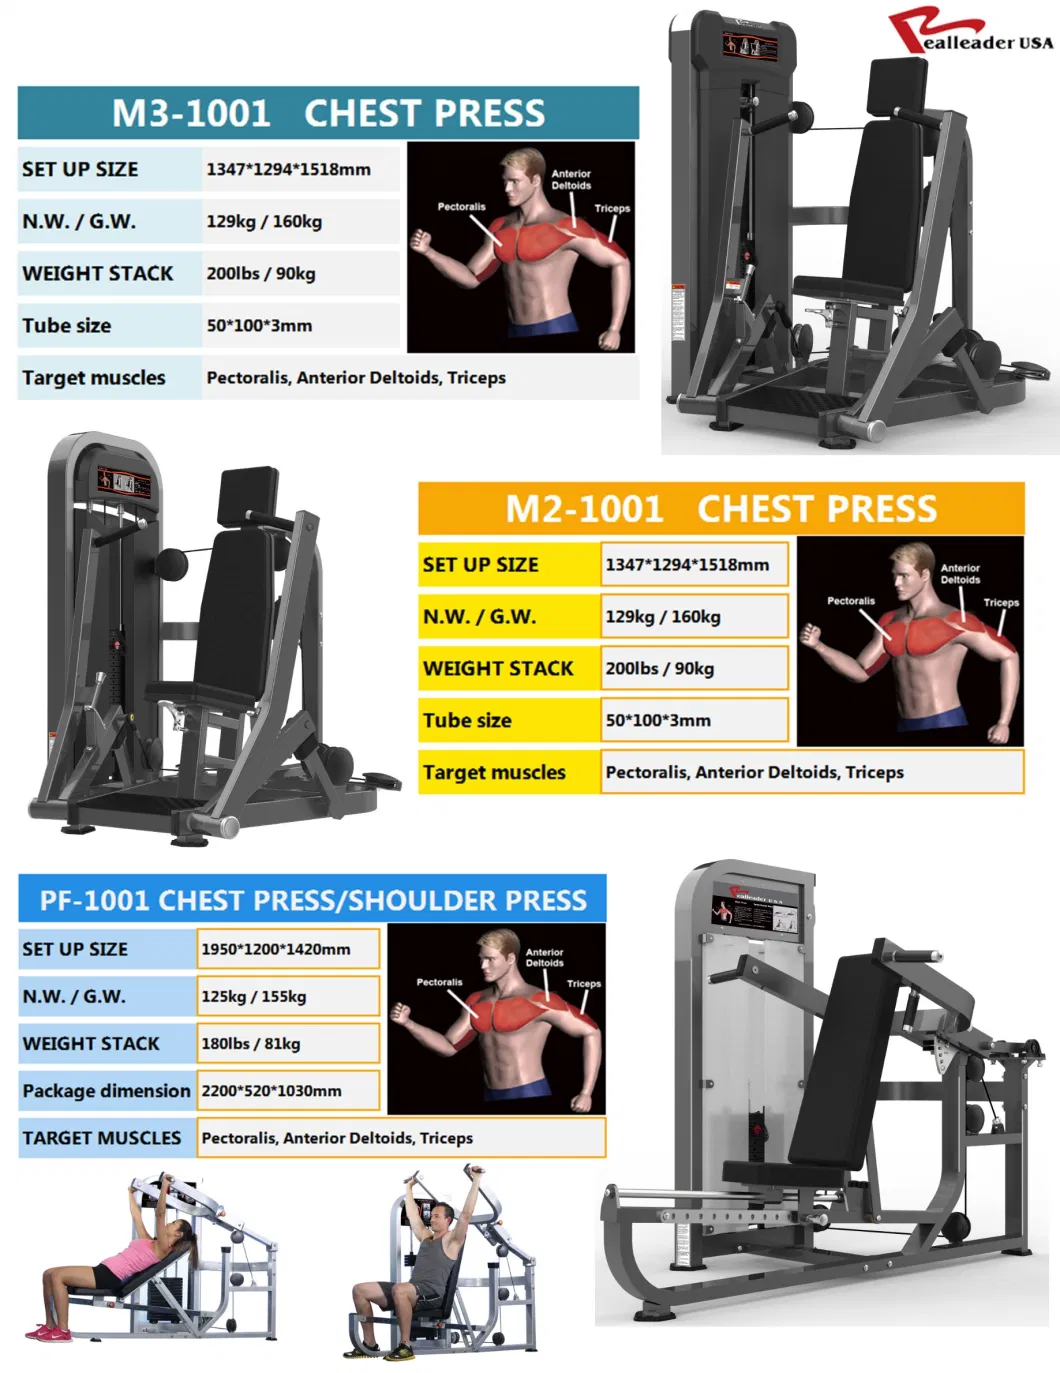 Realleader Fitness Equipment Gym Sports Machine for Chest Press (M7 PRO-1001)